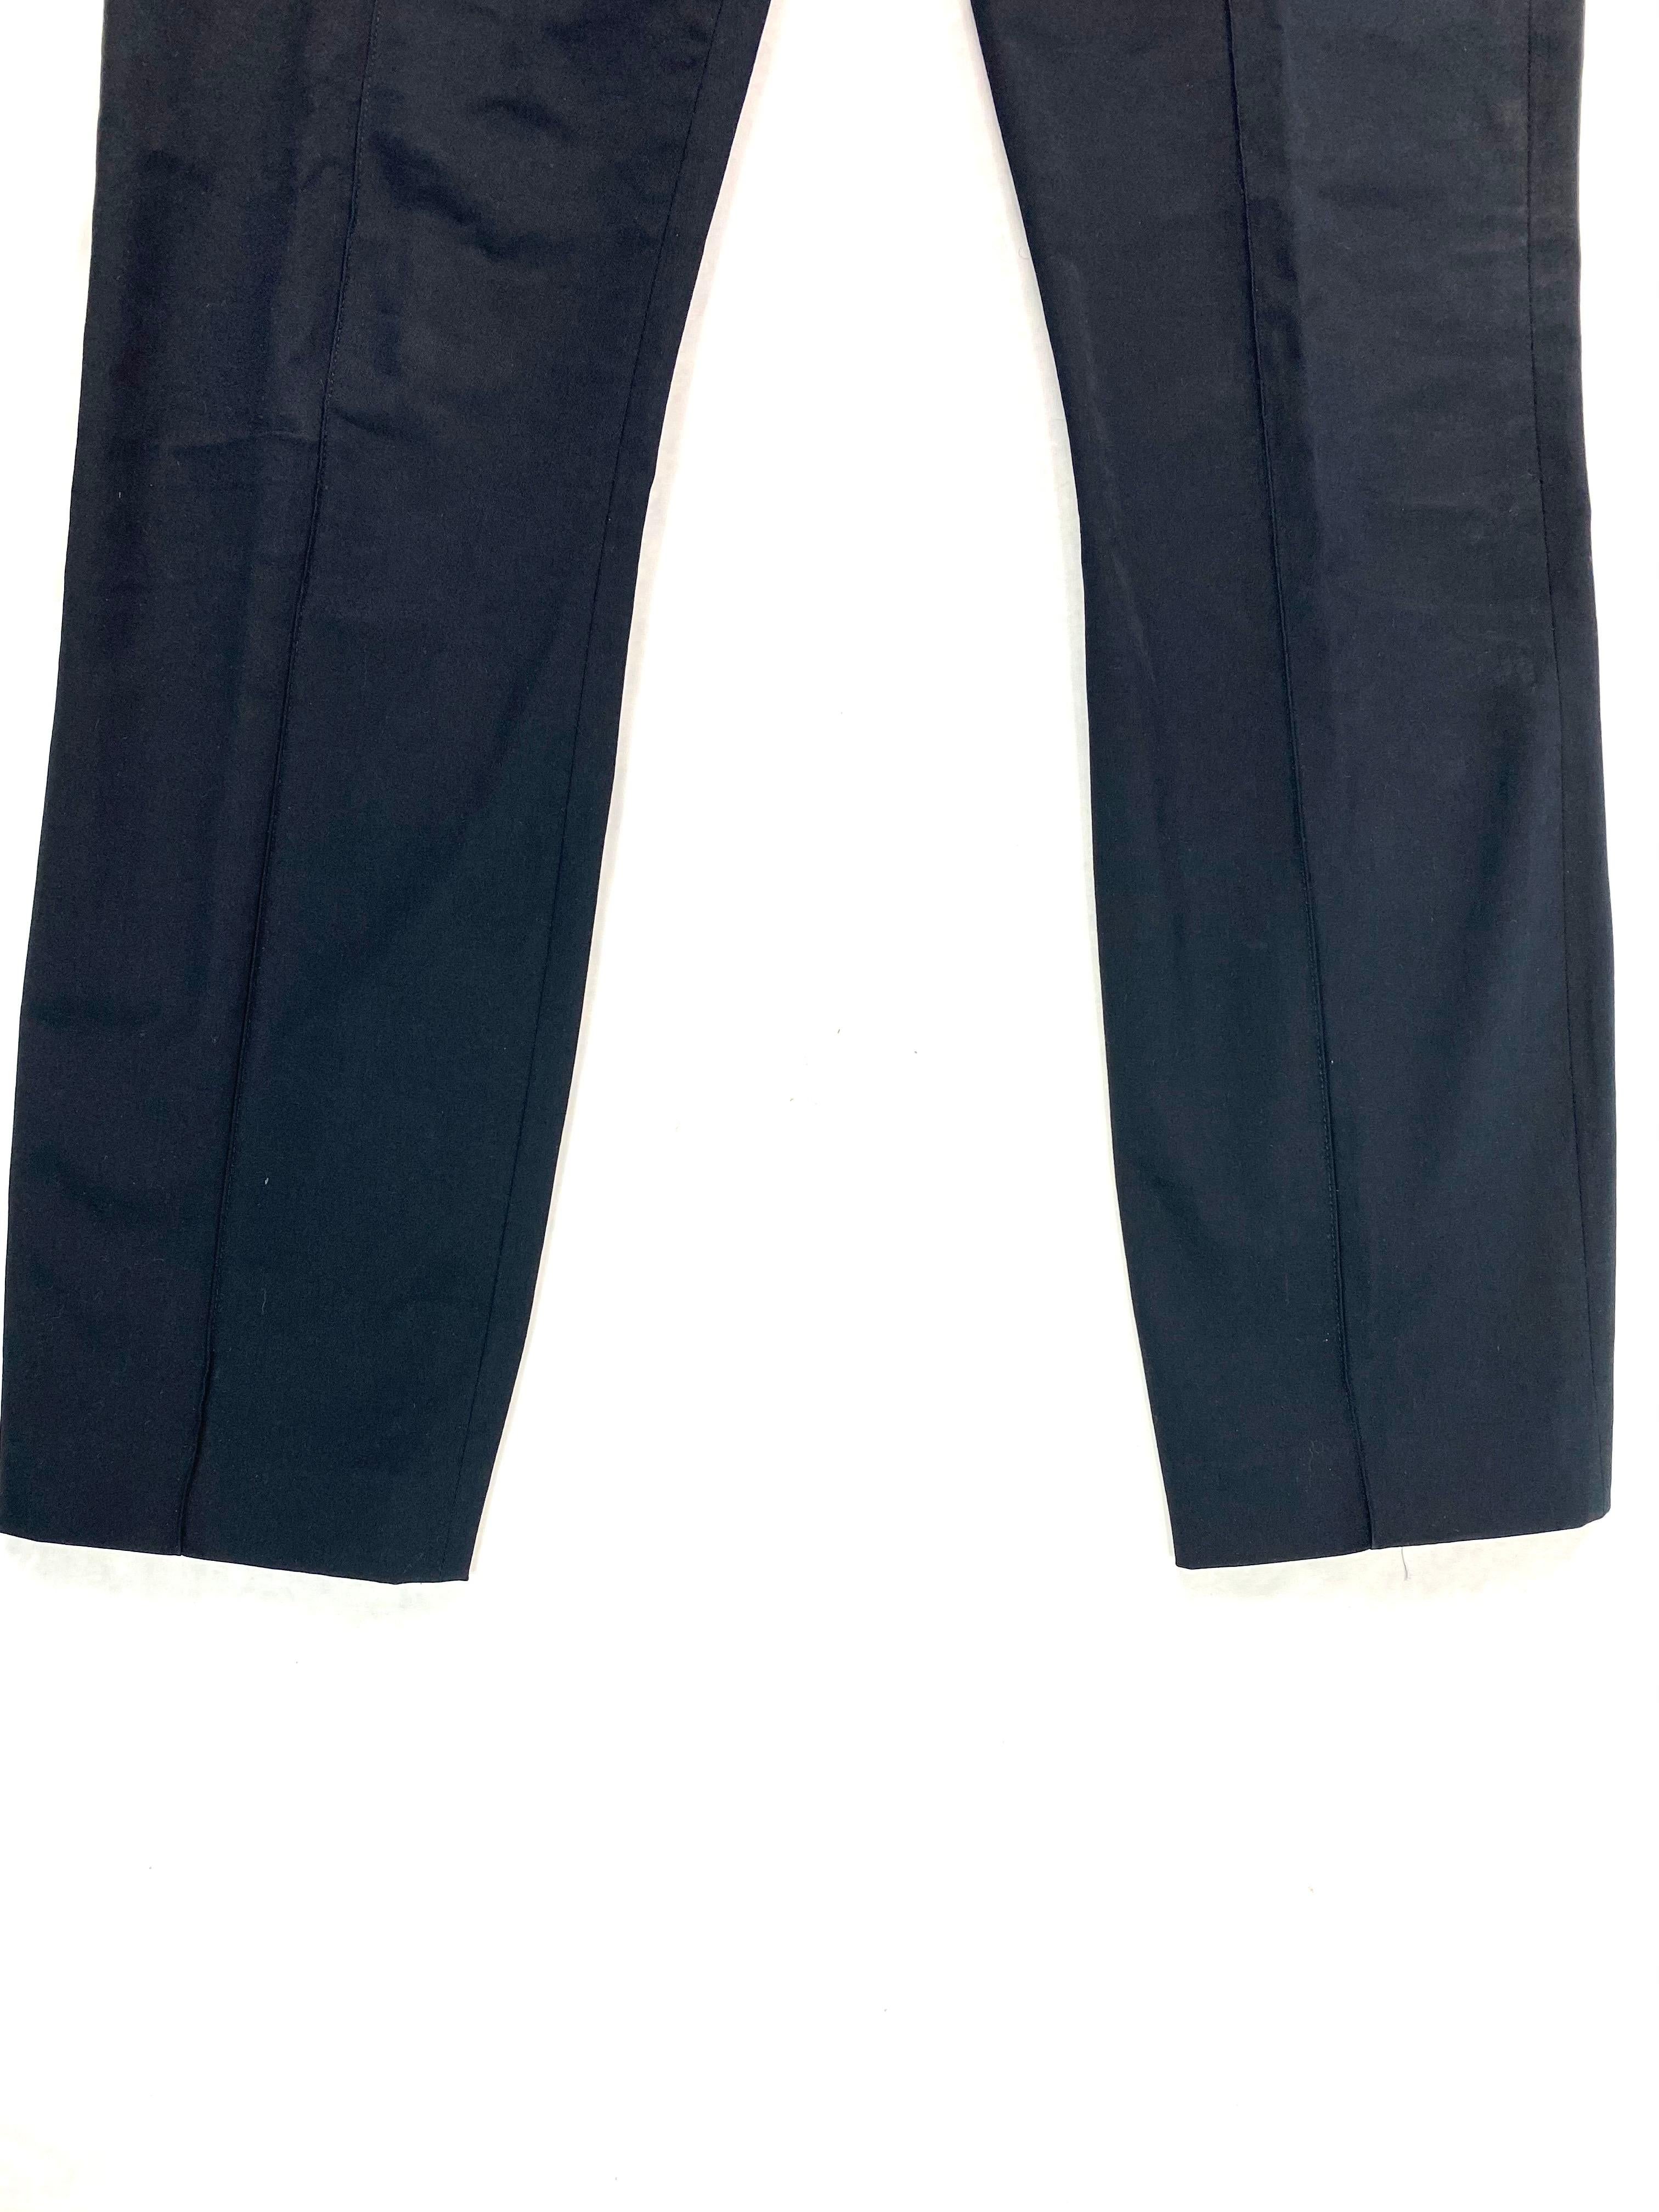 Black The Row Navy Cotton Pants, Size 4 For Sale